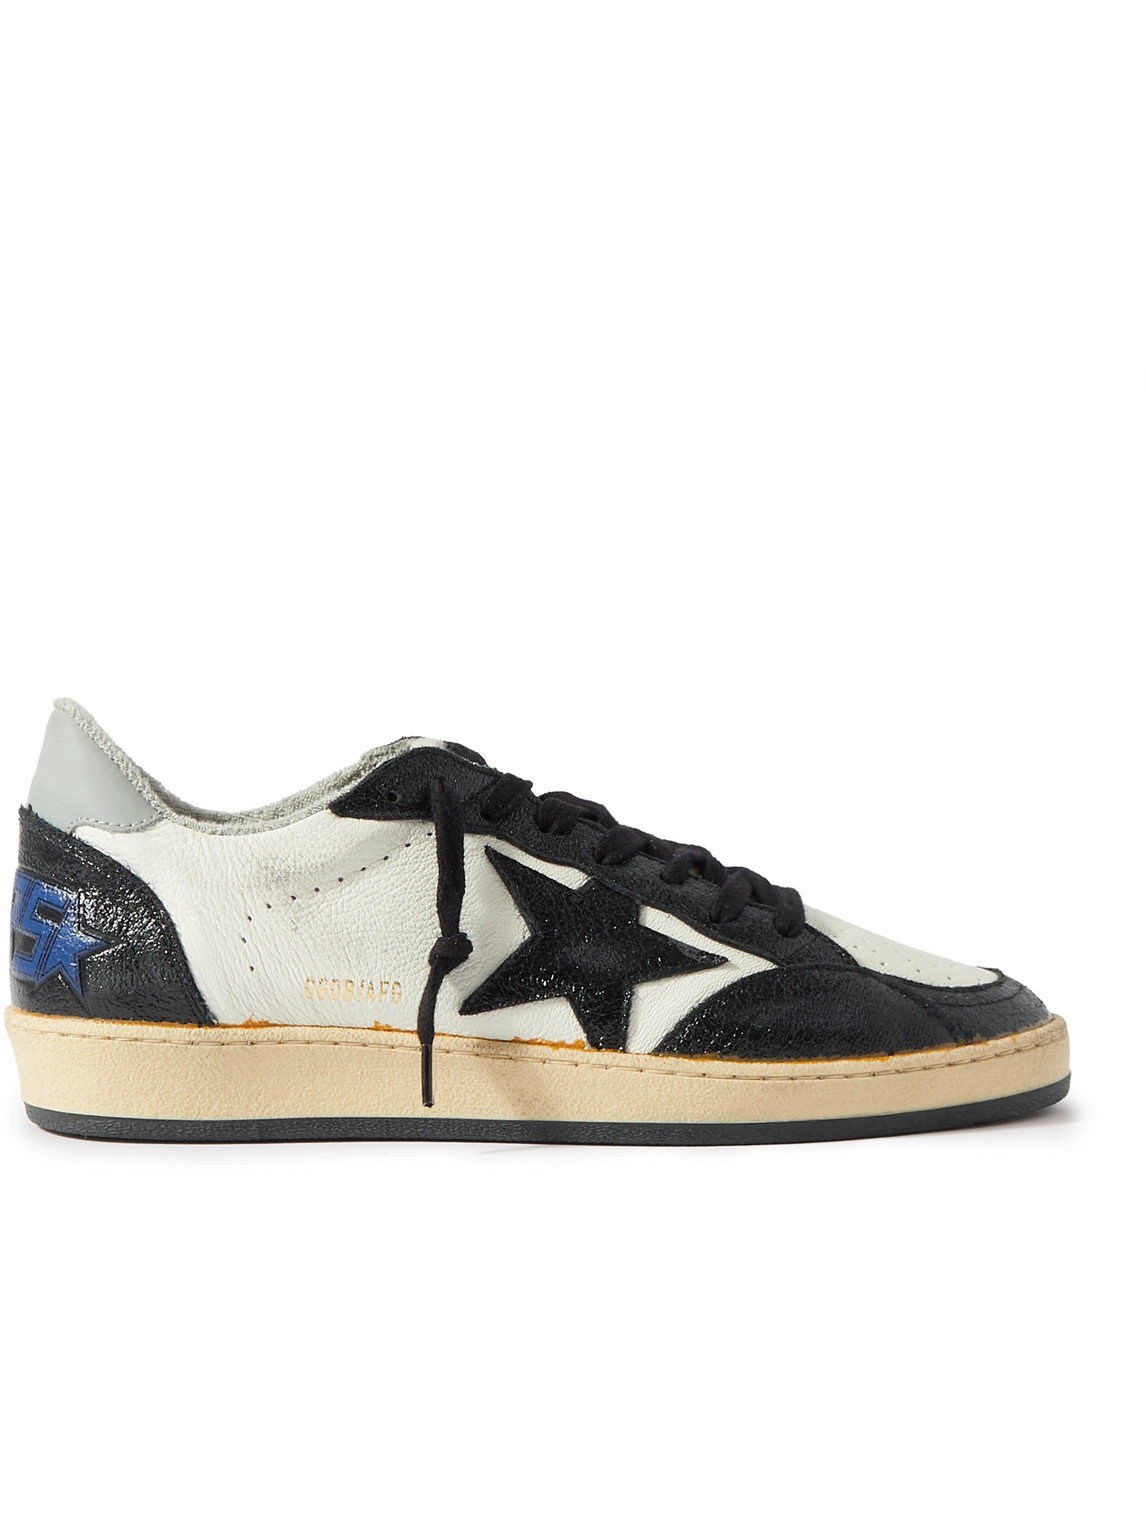 Golden Goose Ball Star Distressed Leather And Shell Sneakers In Black